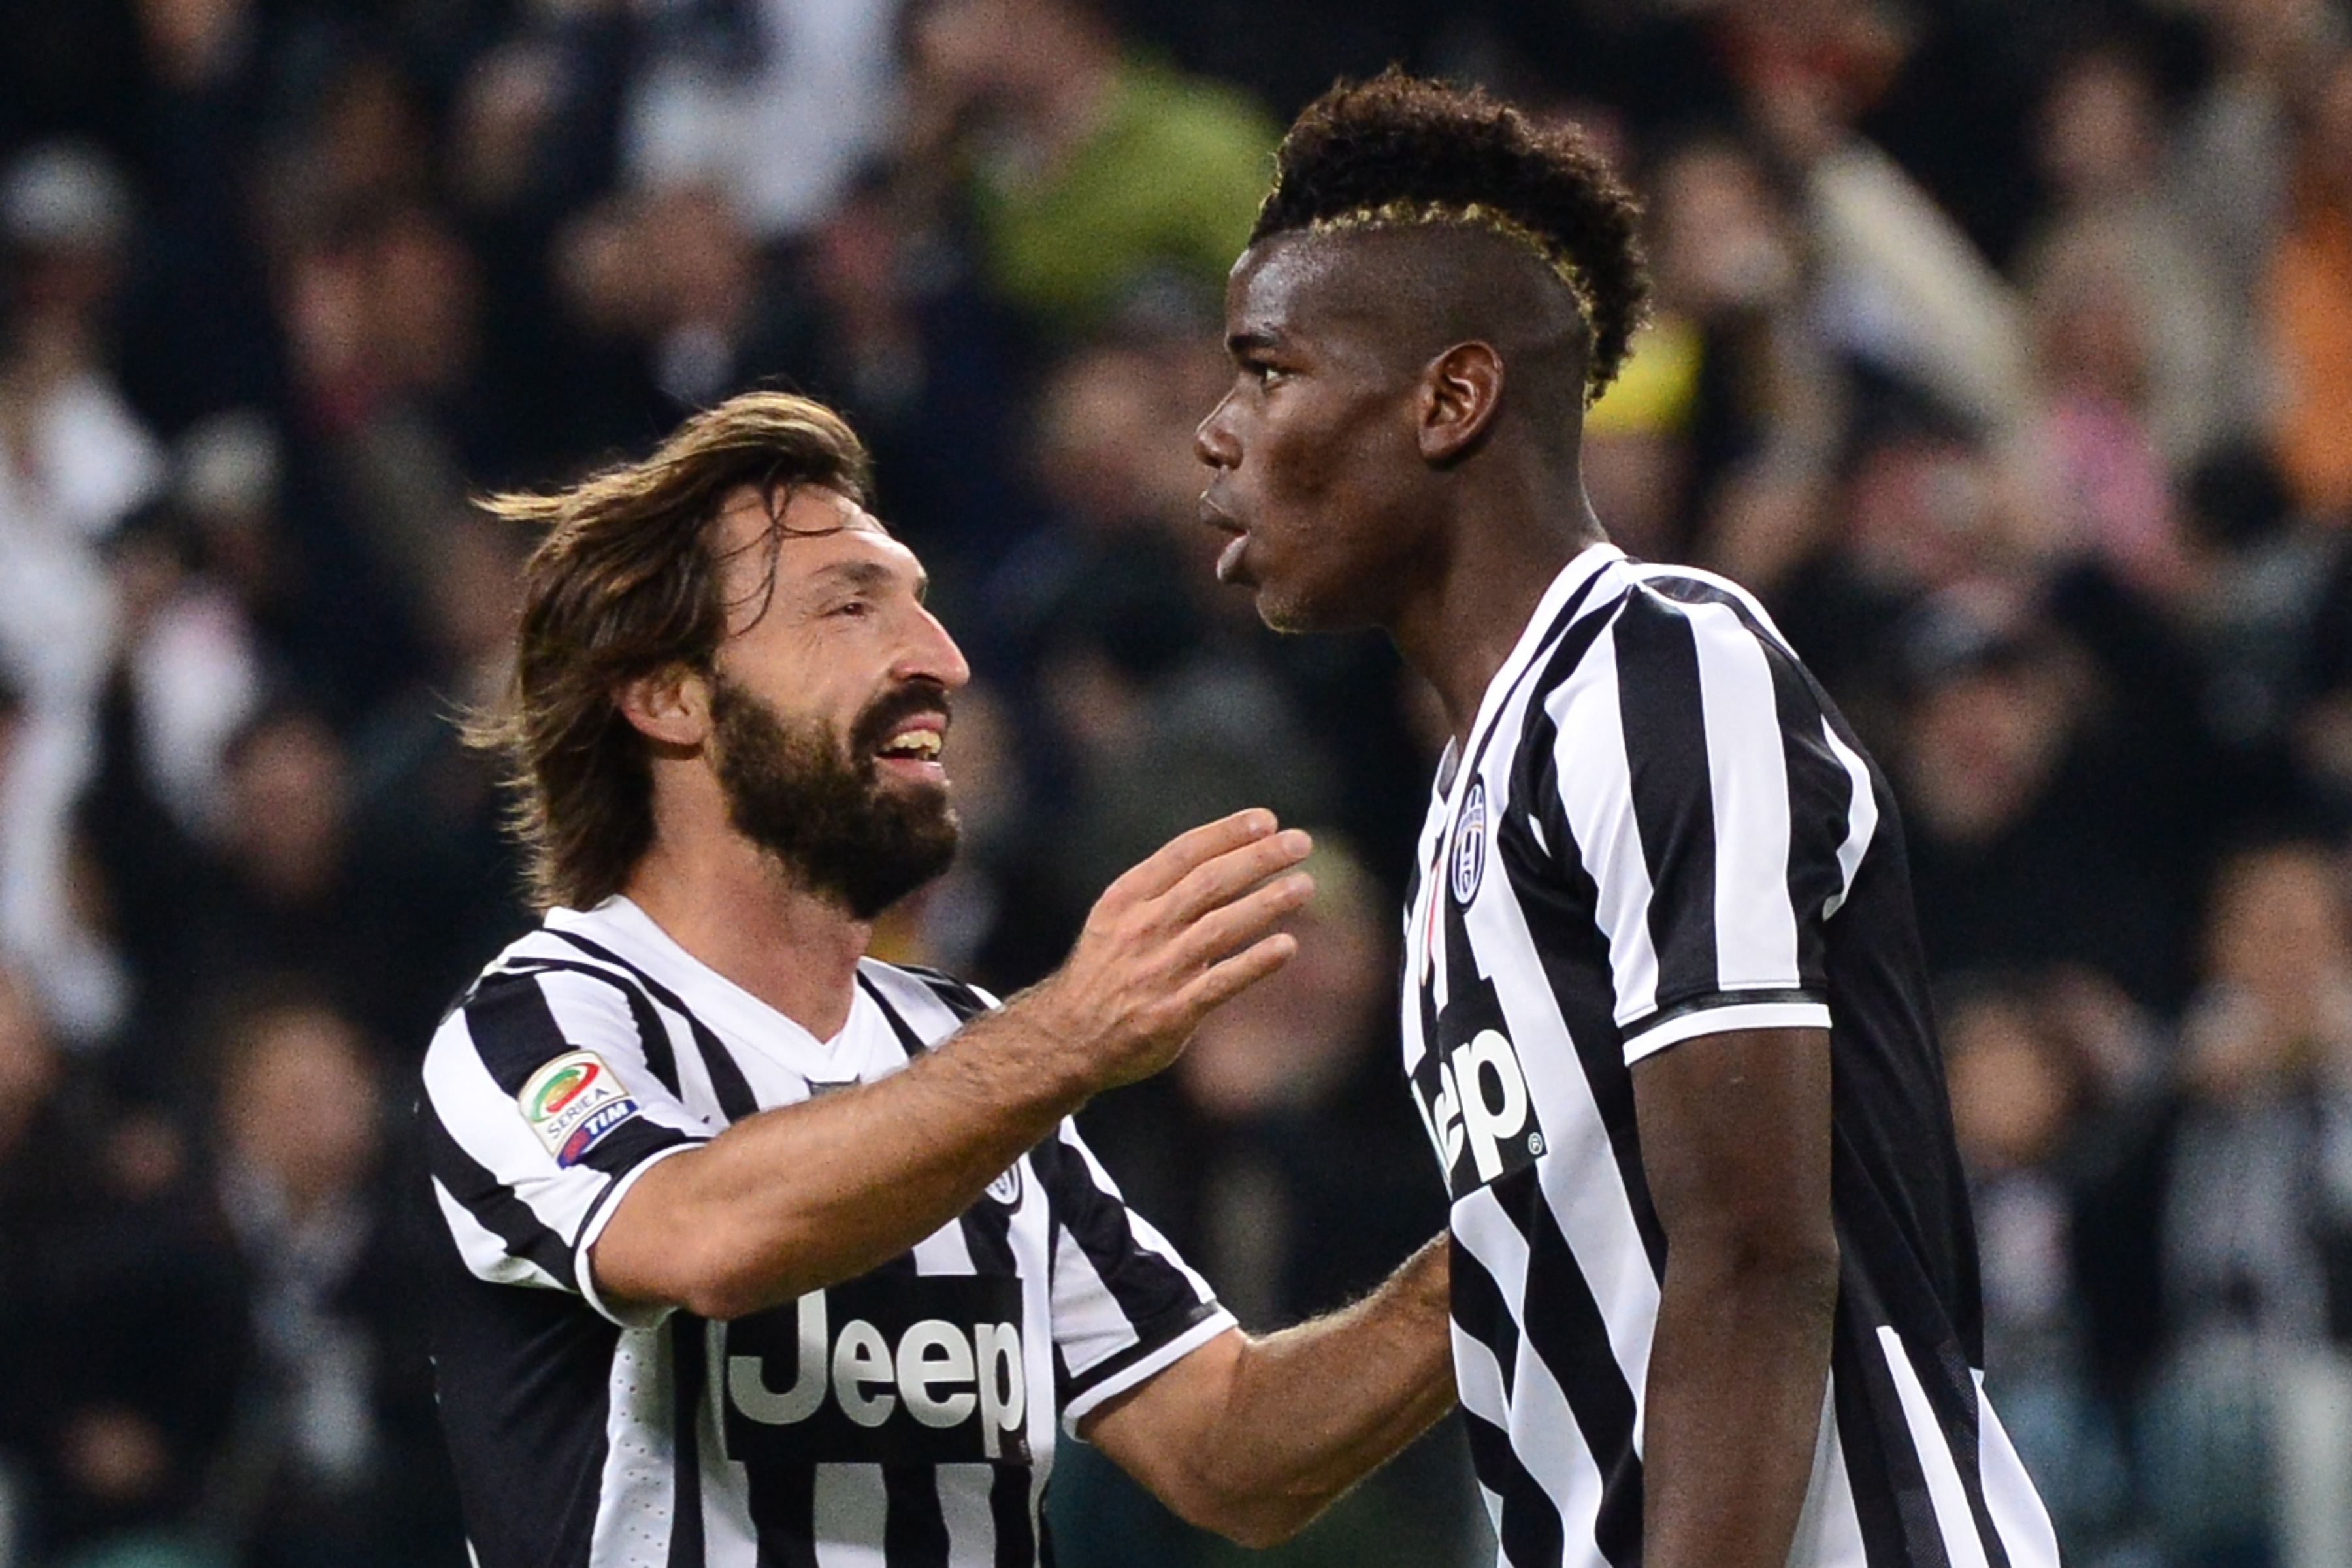 Will we see Andrea Pirlo managing Paul Pogba at Juventus? (Photo by Giuseppe Cacace/AFP/Getty Images)